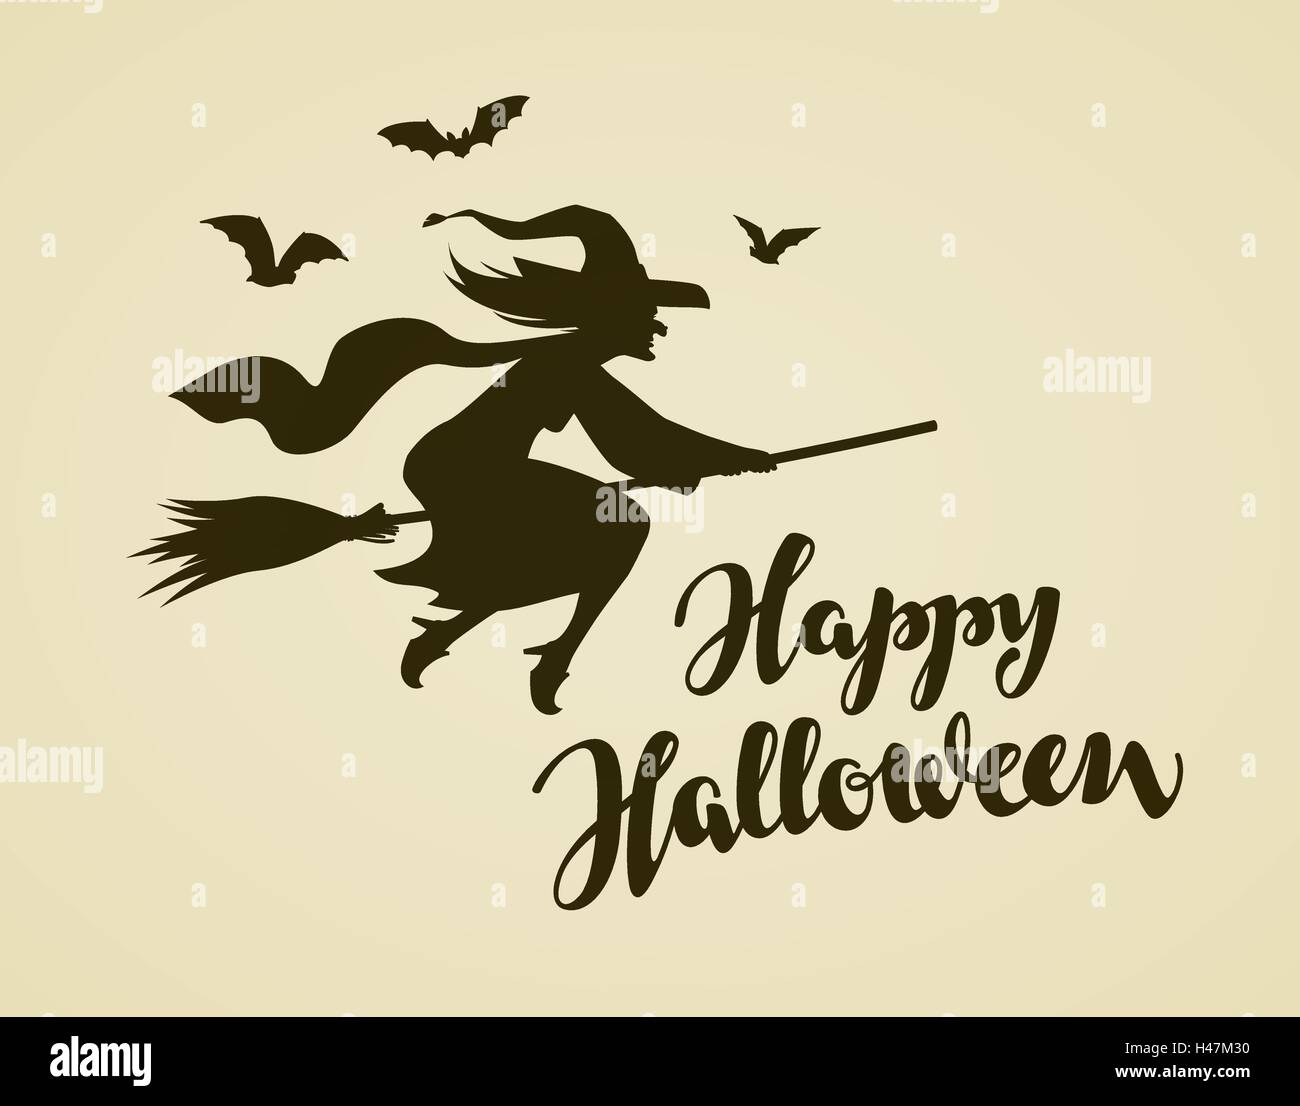 Happy Halloween Greeting Card Witch Flying On Broomstick Vintage Vector Illustration Stock